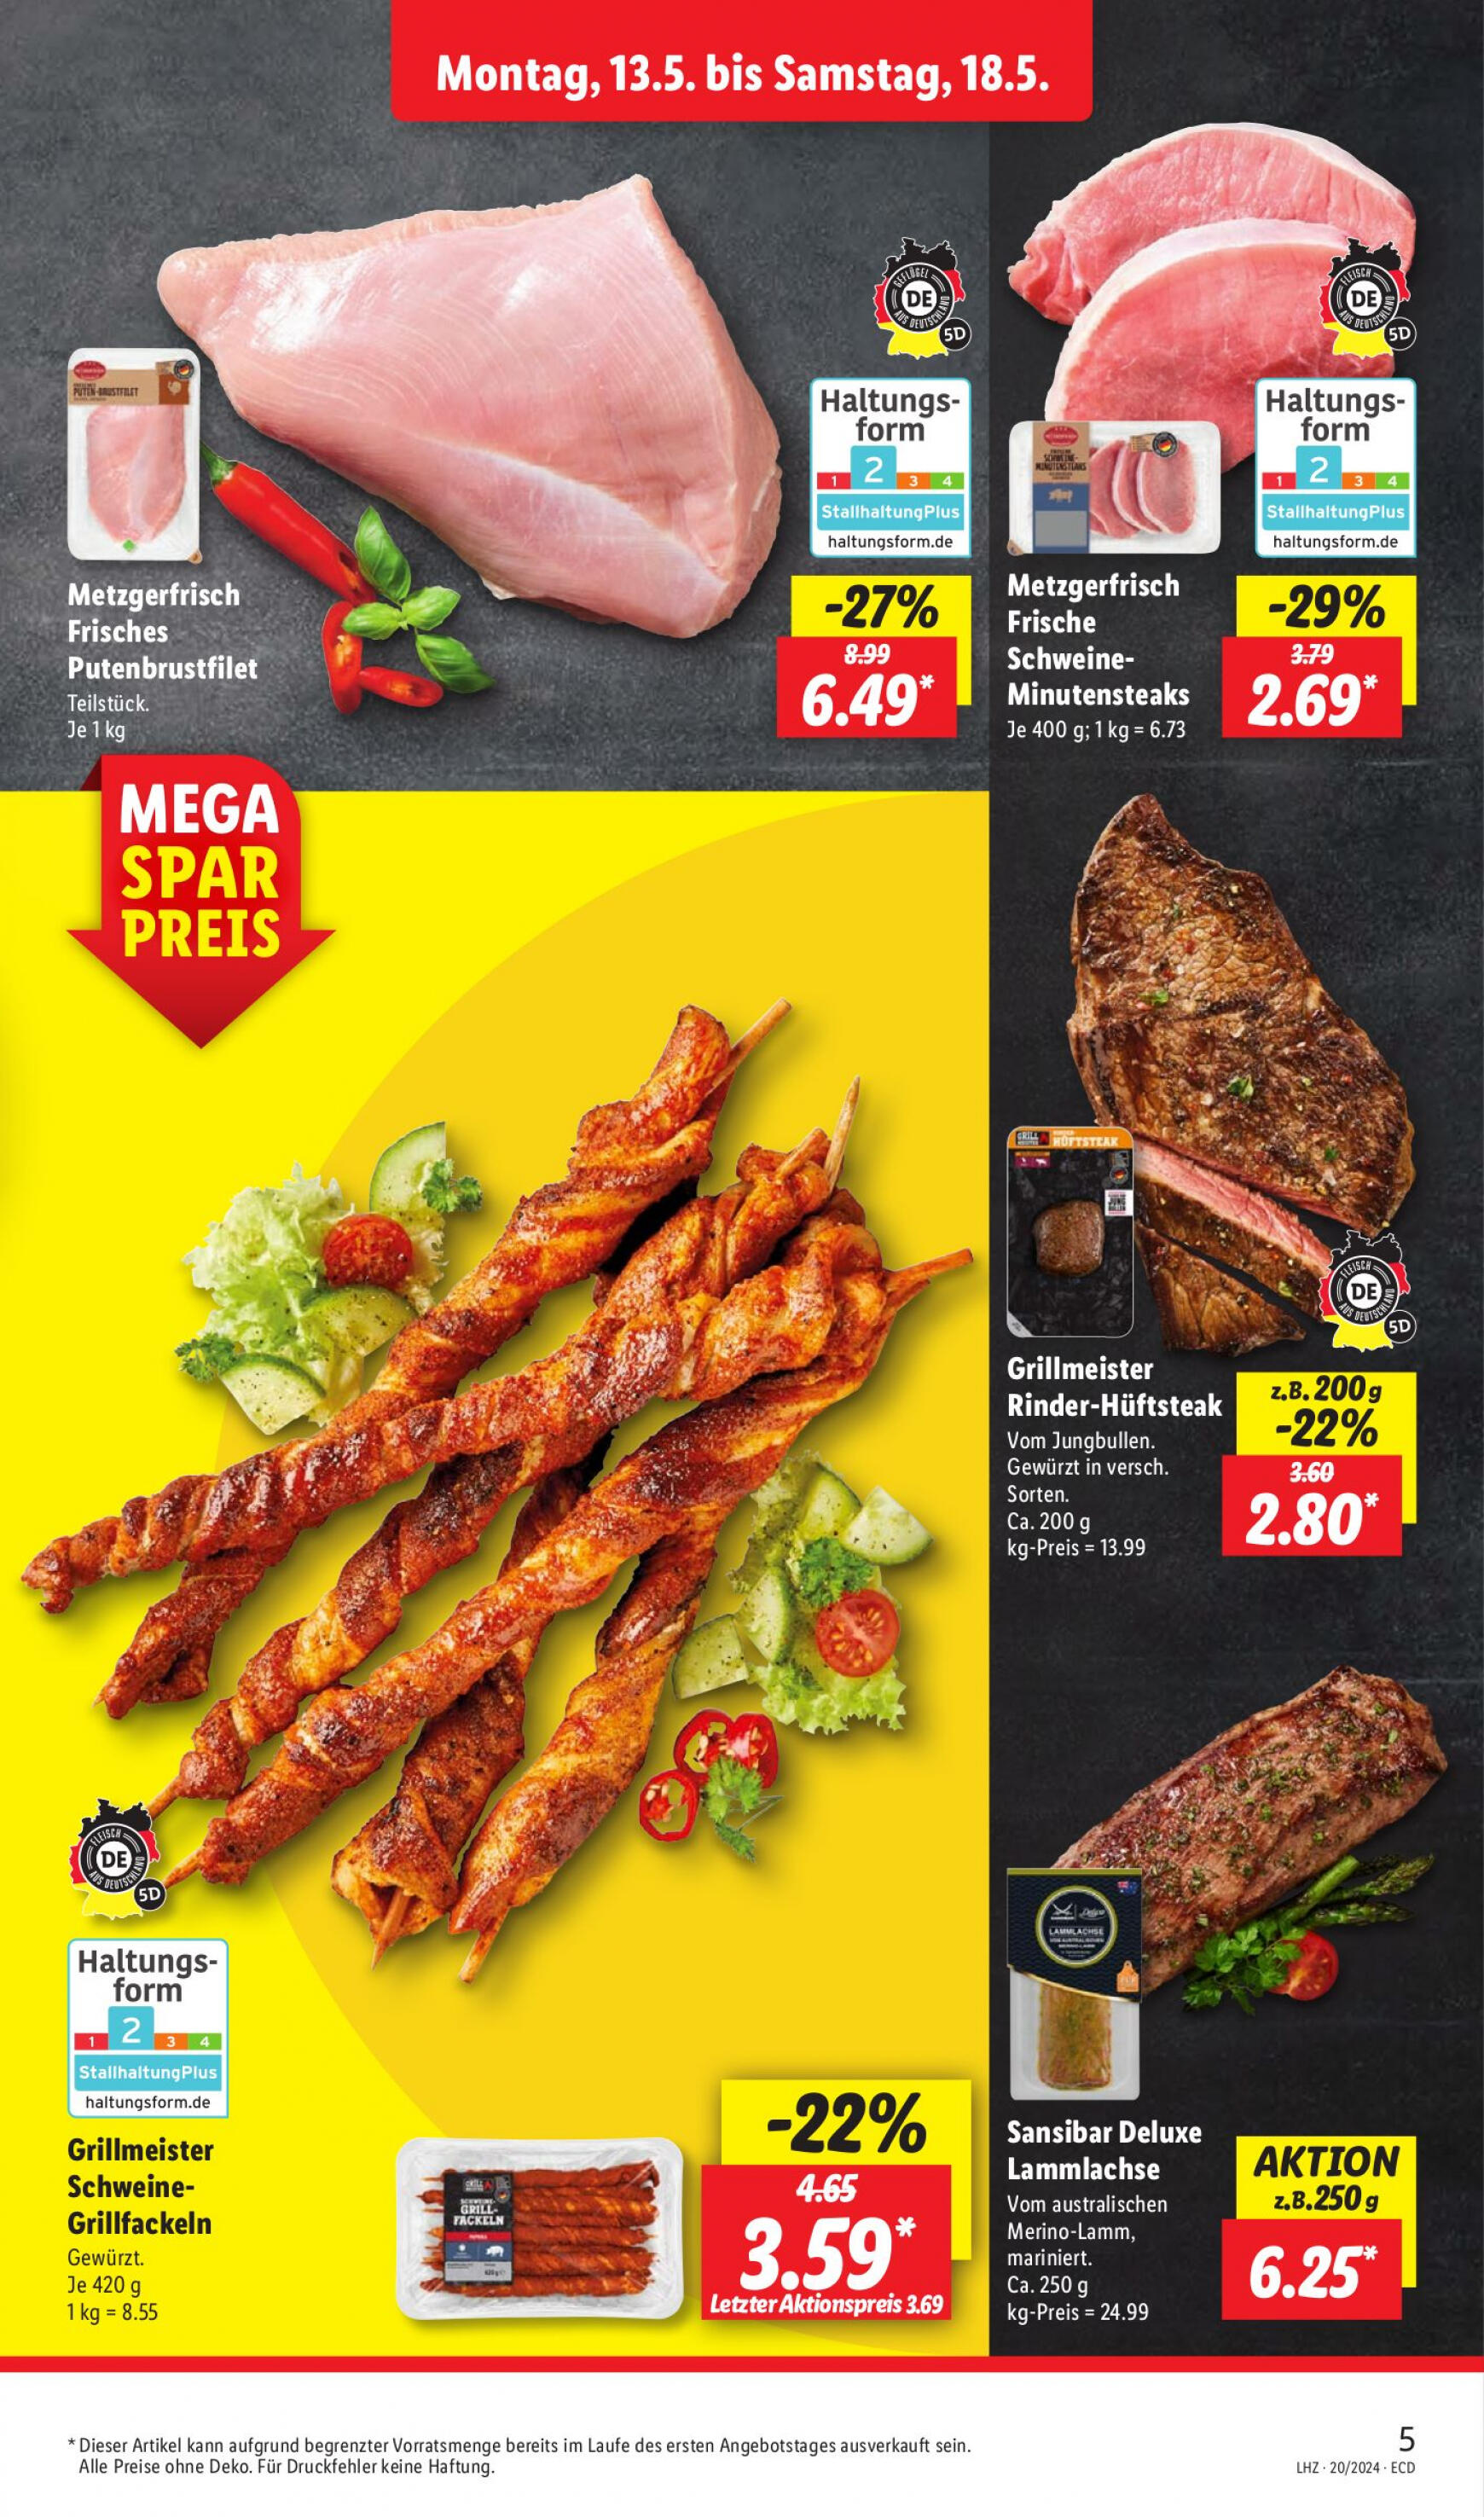 lidl - Flyer Lidl aktuell 13.05. - 18.05. - page: 5